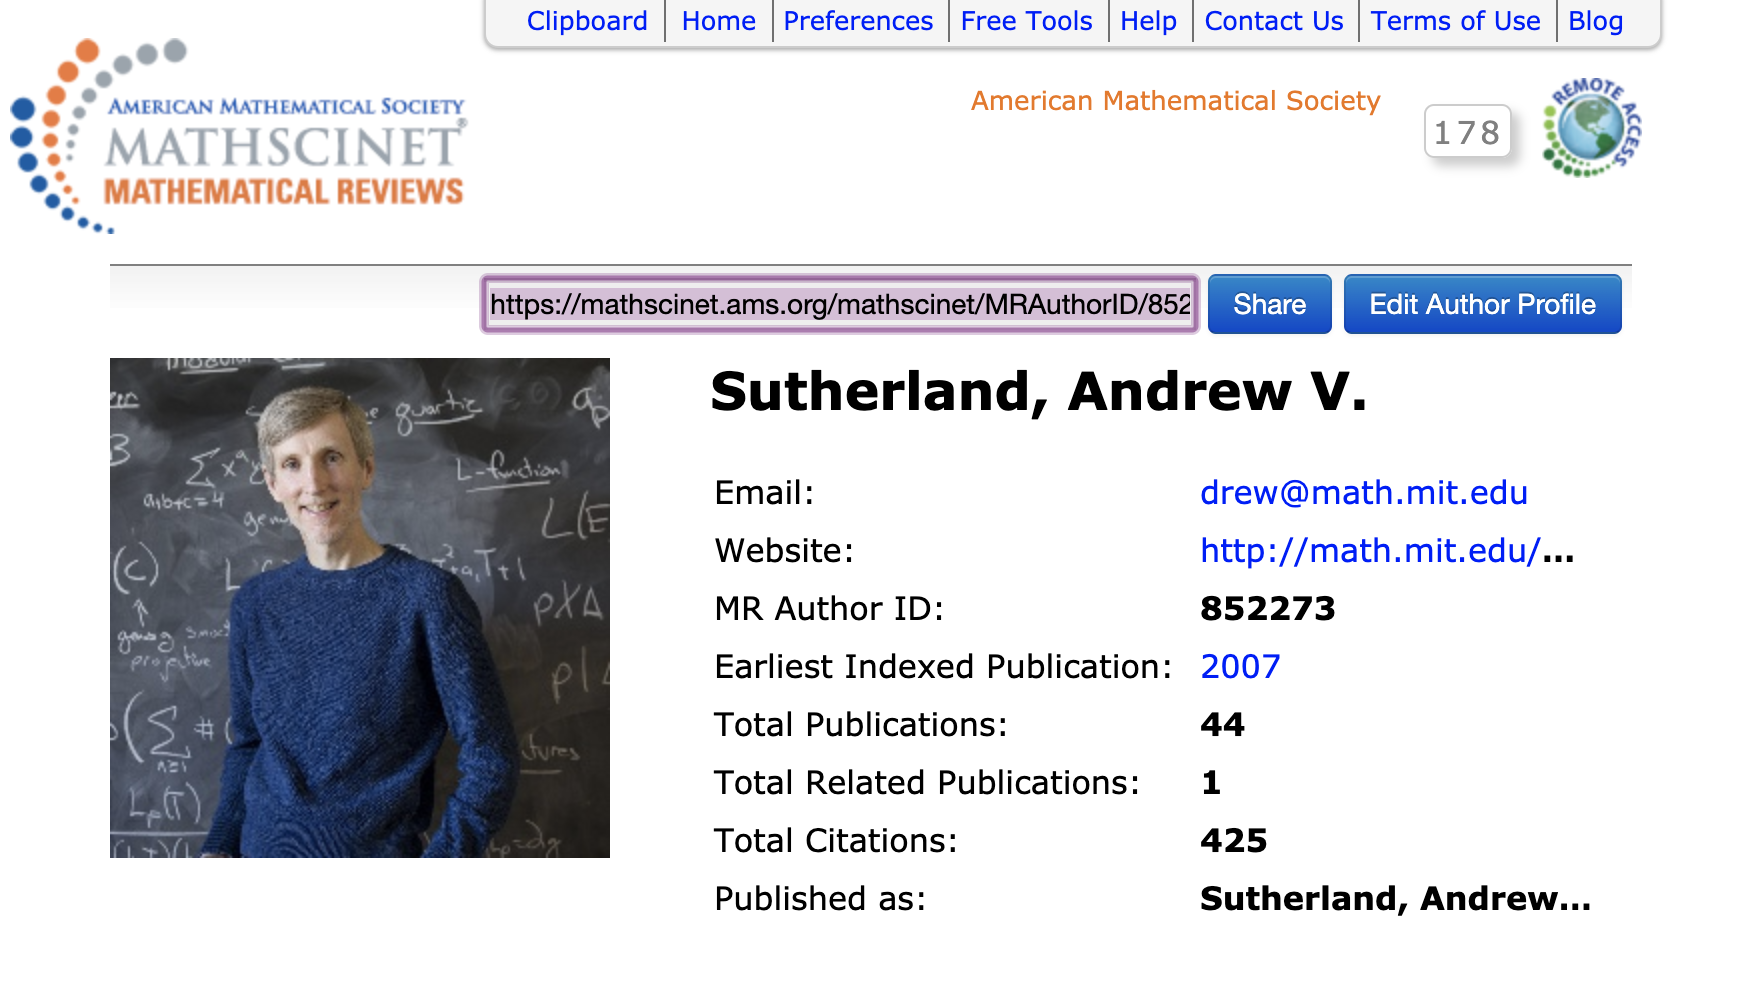 Author Profile Page for Andrew Sutherland showing the SHARE functionality